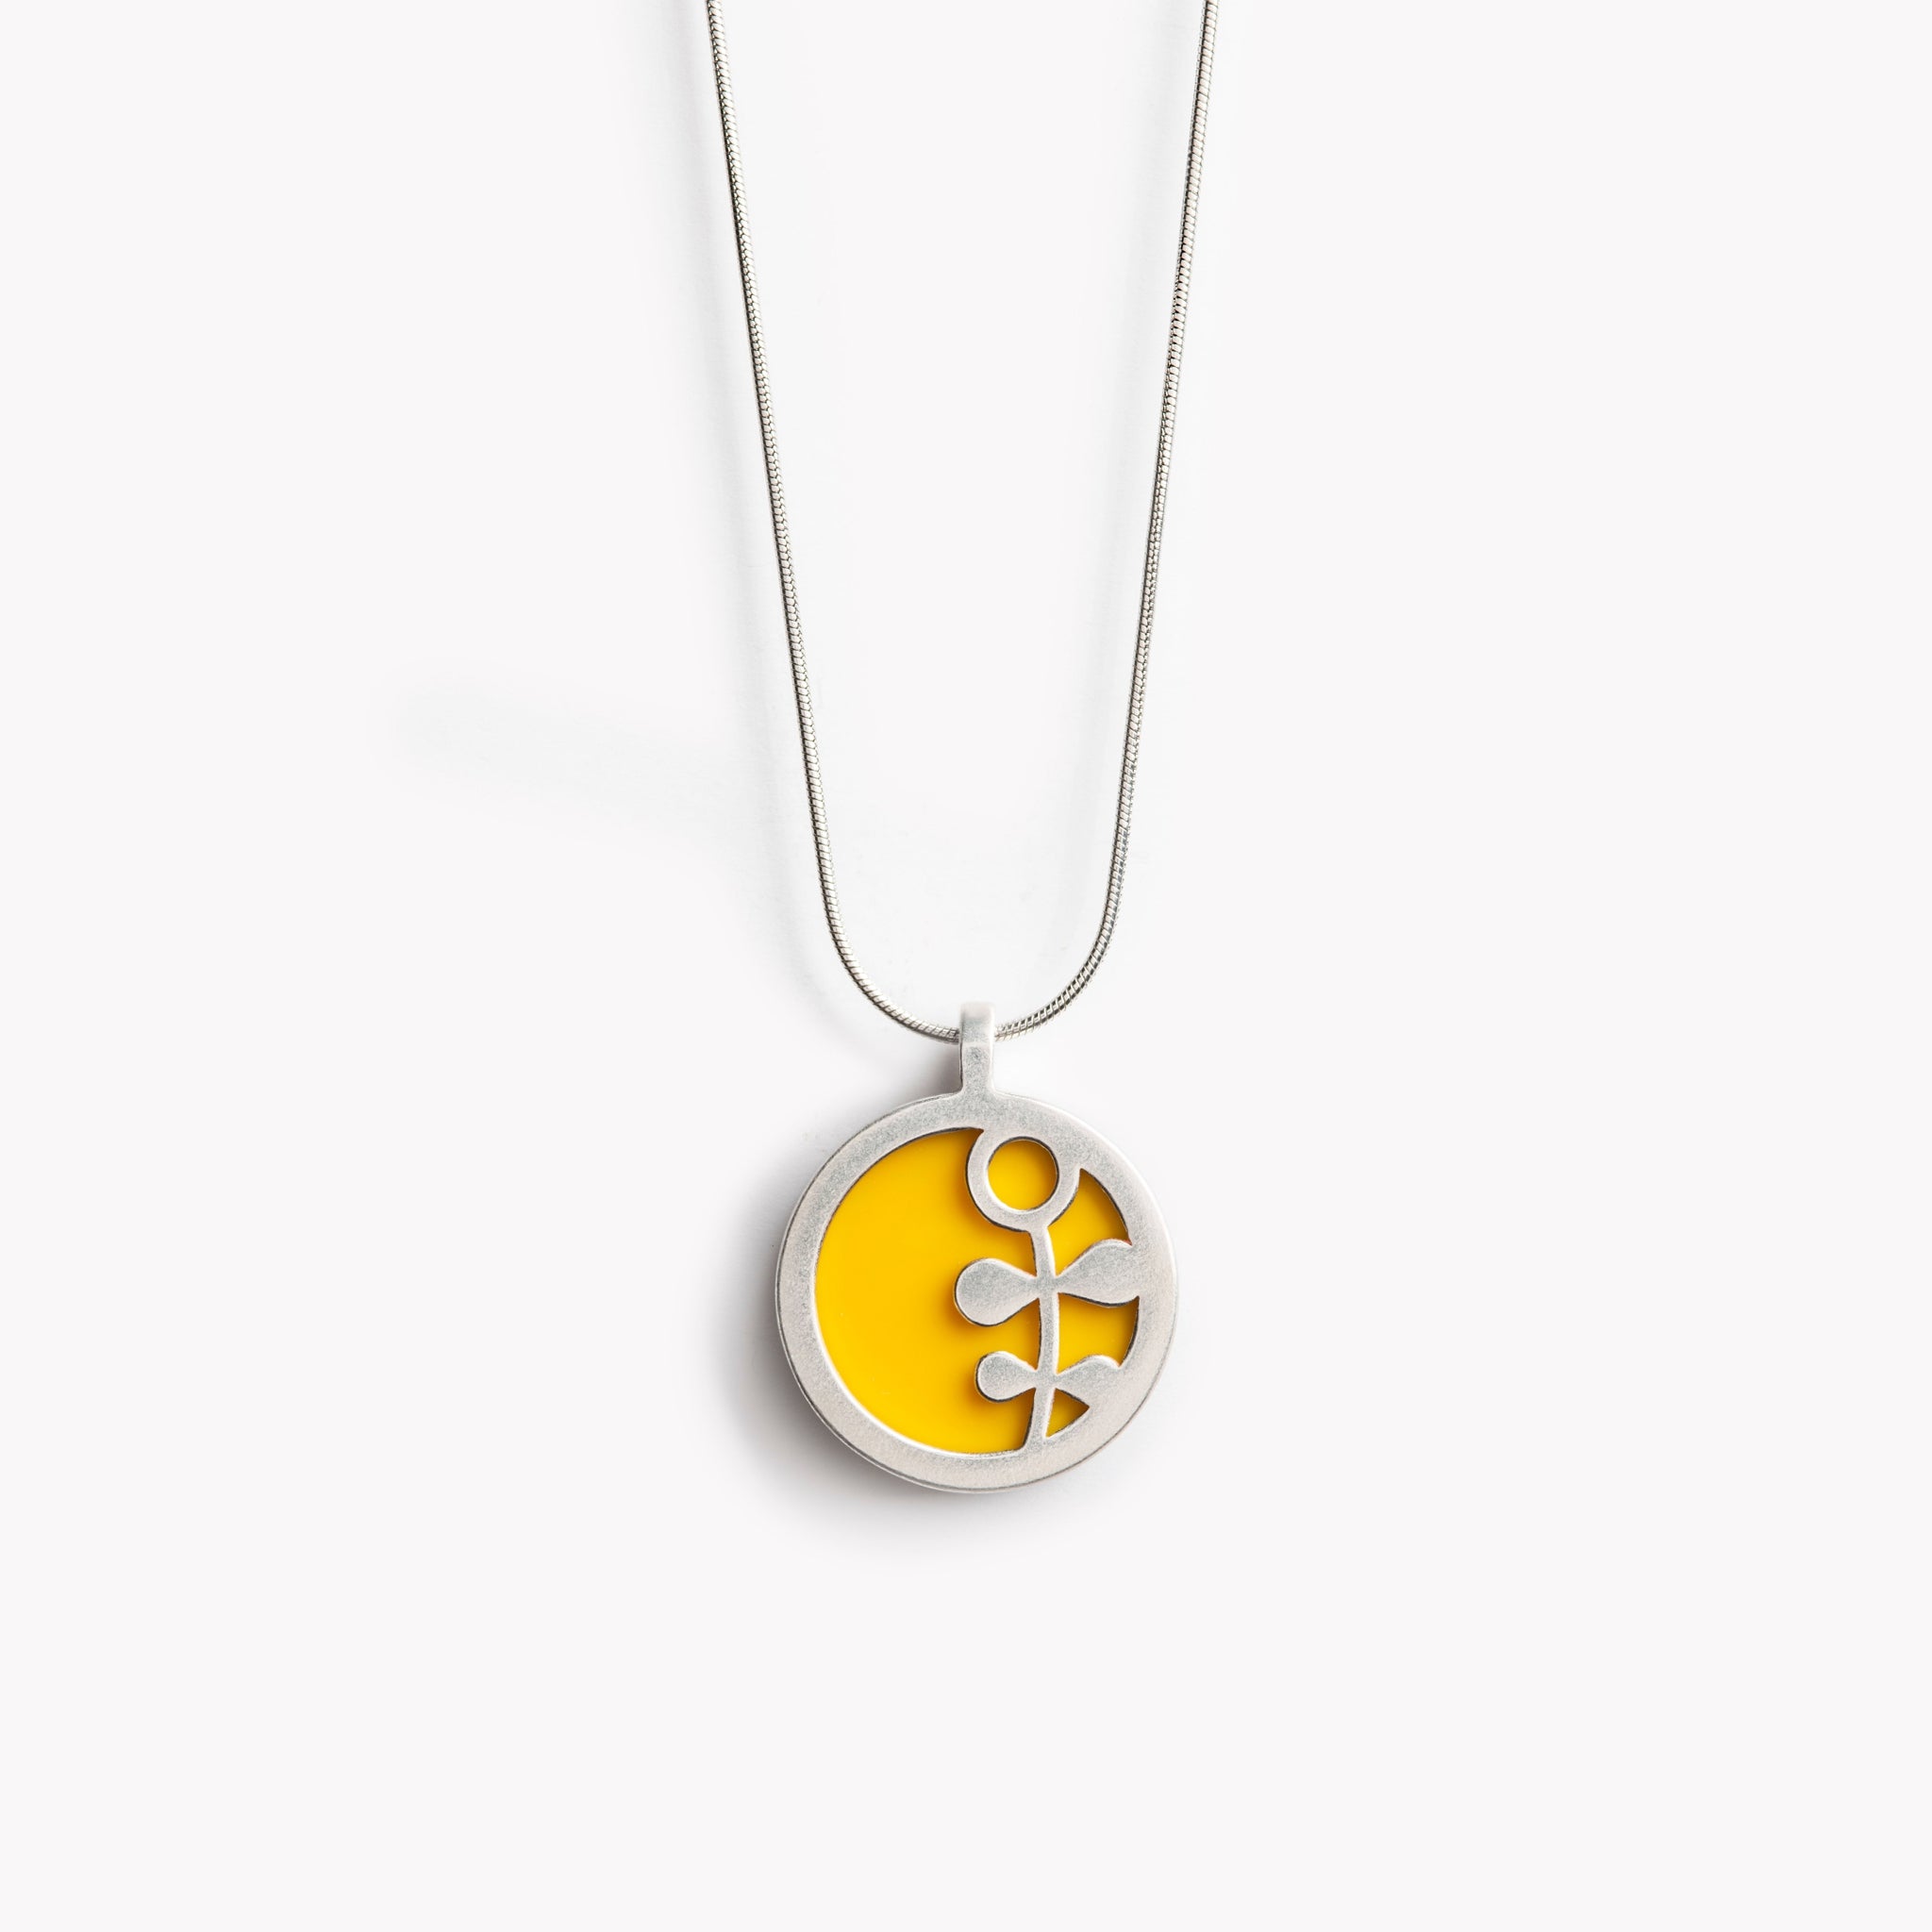 The image shows a circular pendant with a simple Scandinavian style flower stem design.  It has a bright yellow inset which is surrounded by brightly polished pewter, with the flower  stem also highlighted in polished pewter. The pendant is bathed in sunlight on a crisp white  background. This is a simple yet vibrant, modern and colourful pendant necklace design.